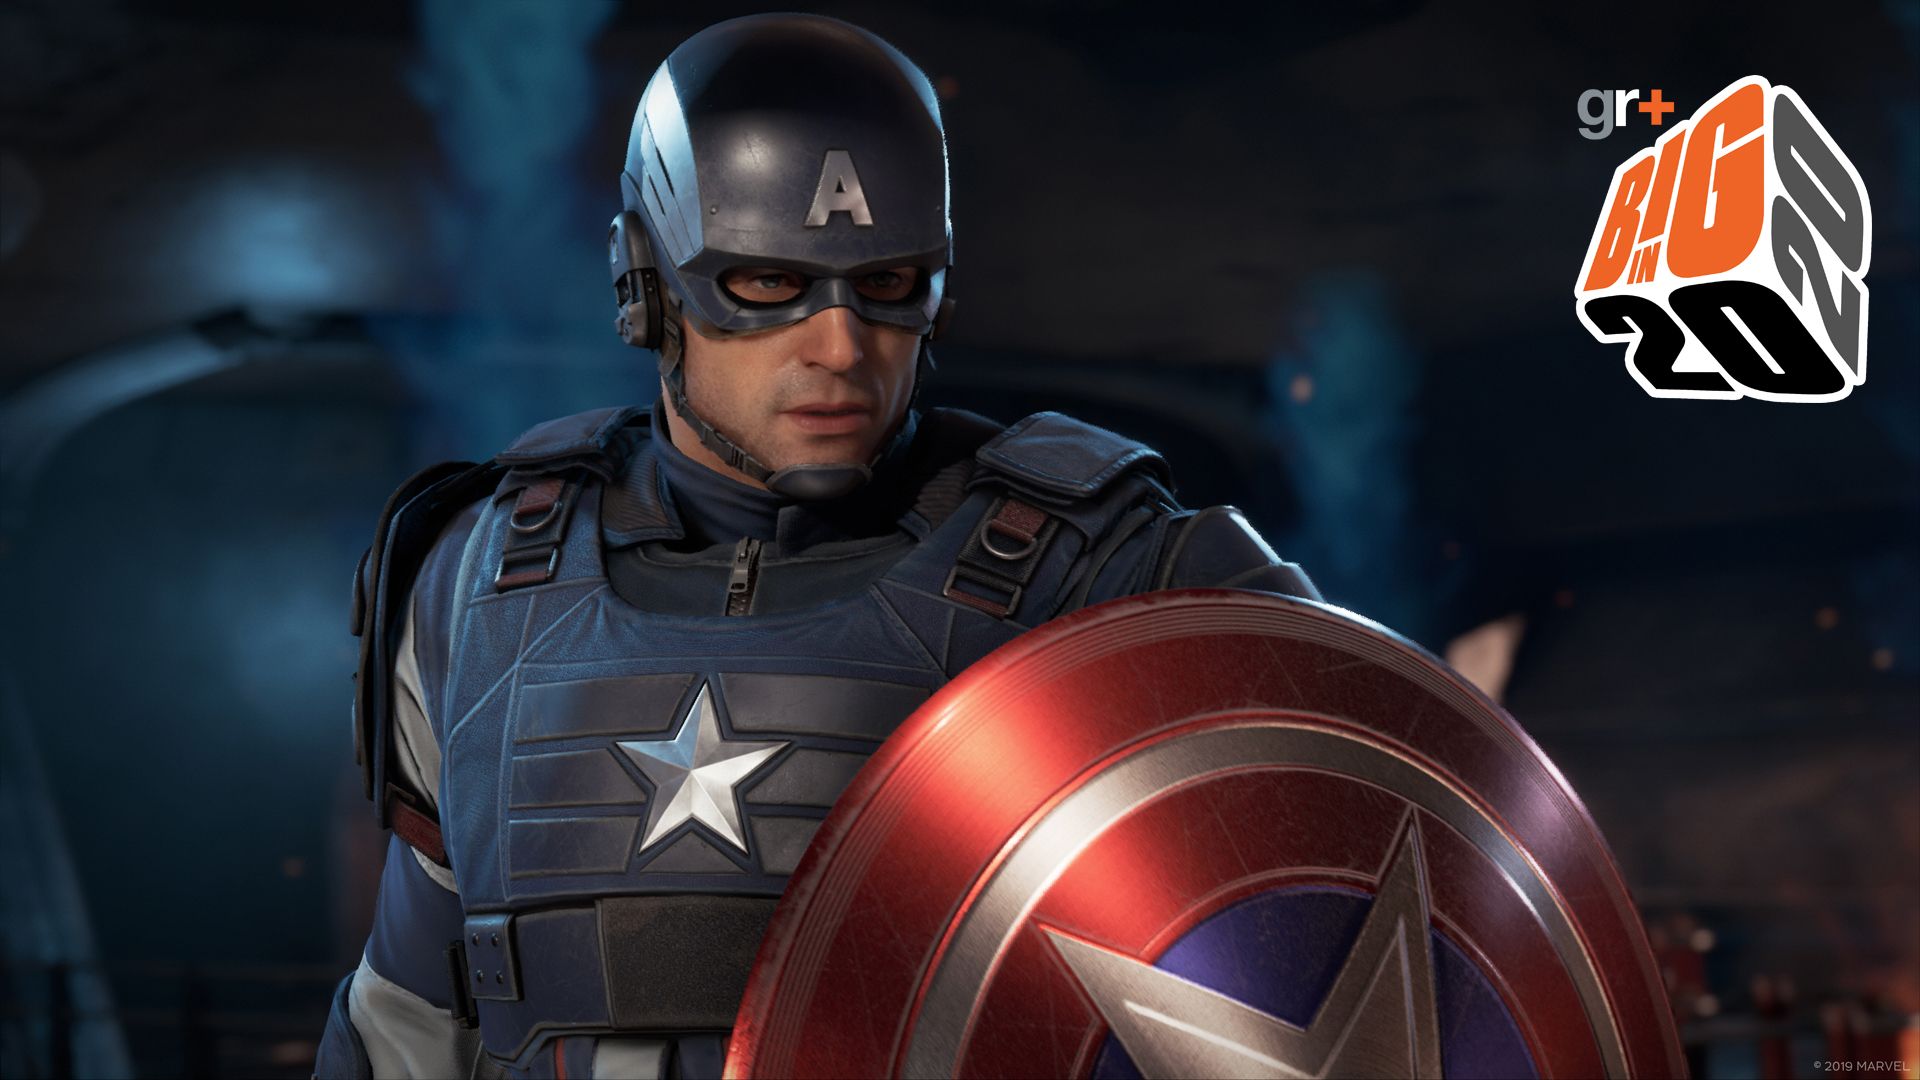 Big in 2020: Marvel's Avengers is not your typical superhero game